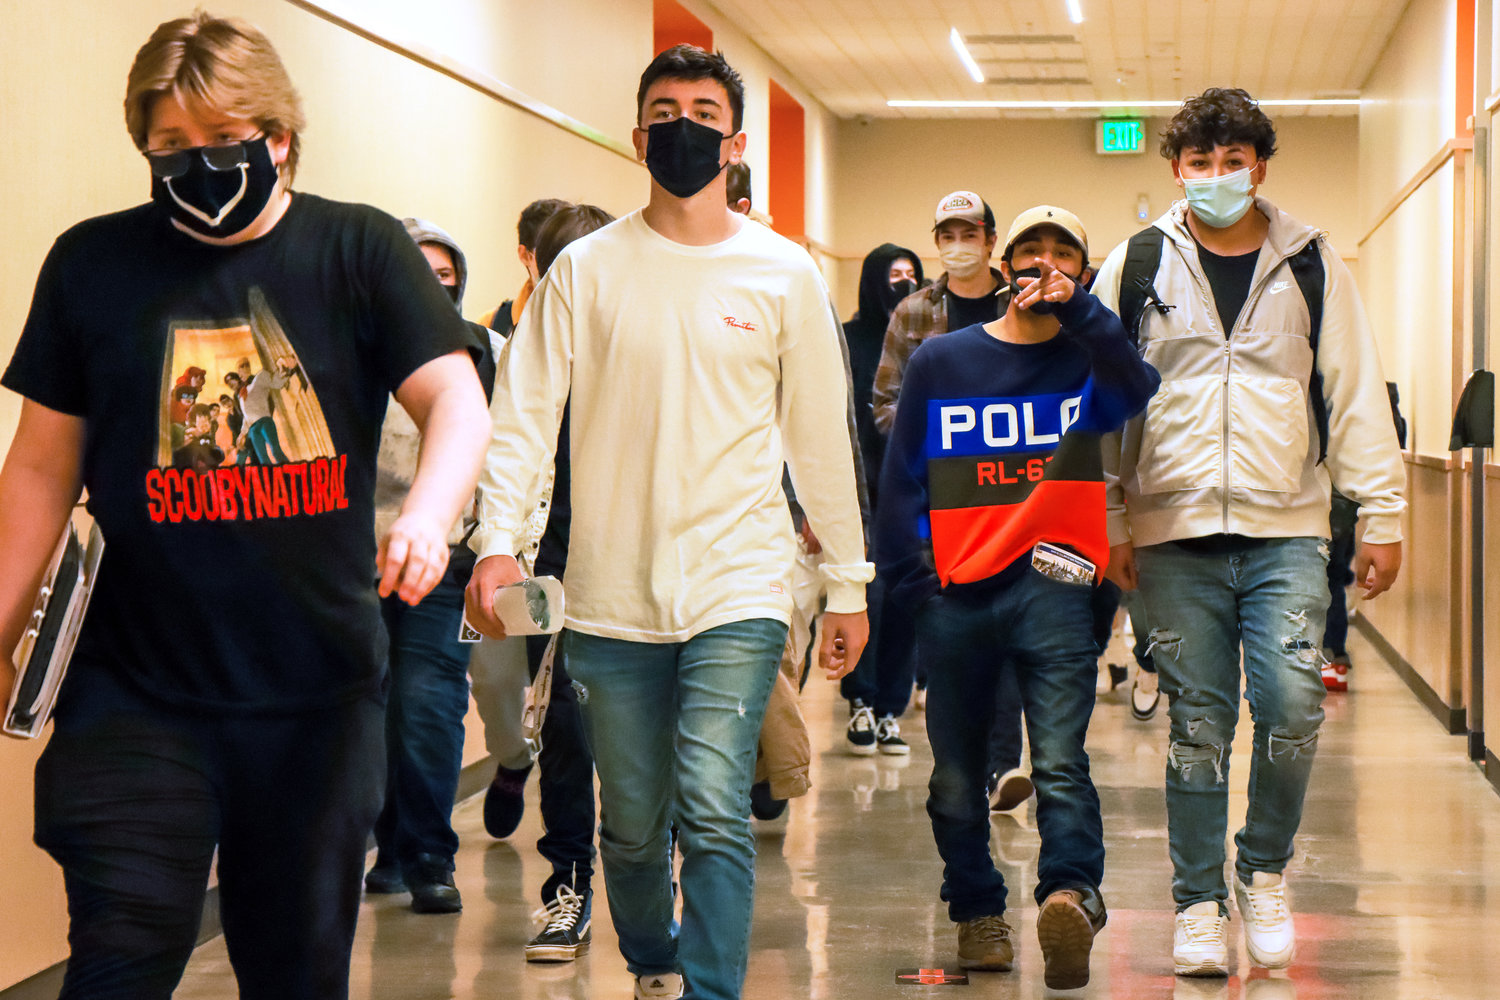 Students sport masks as they walk to their classes during their first week back in school at Centralia High School.